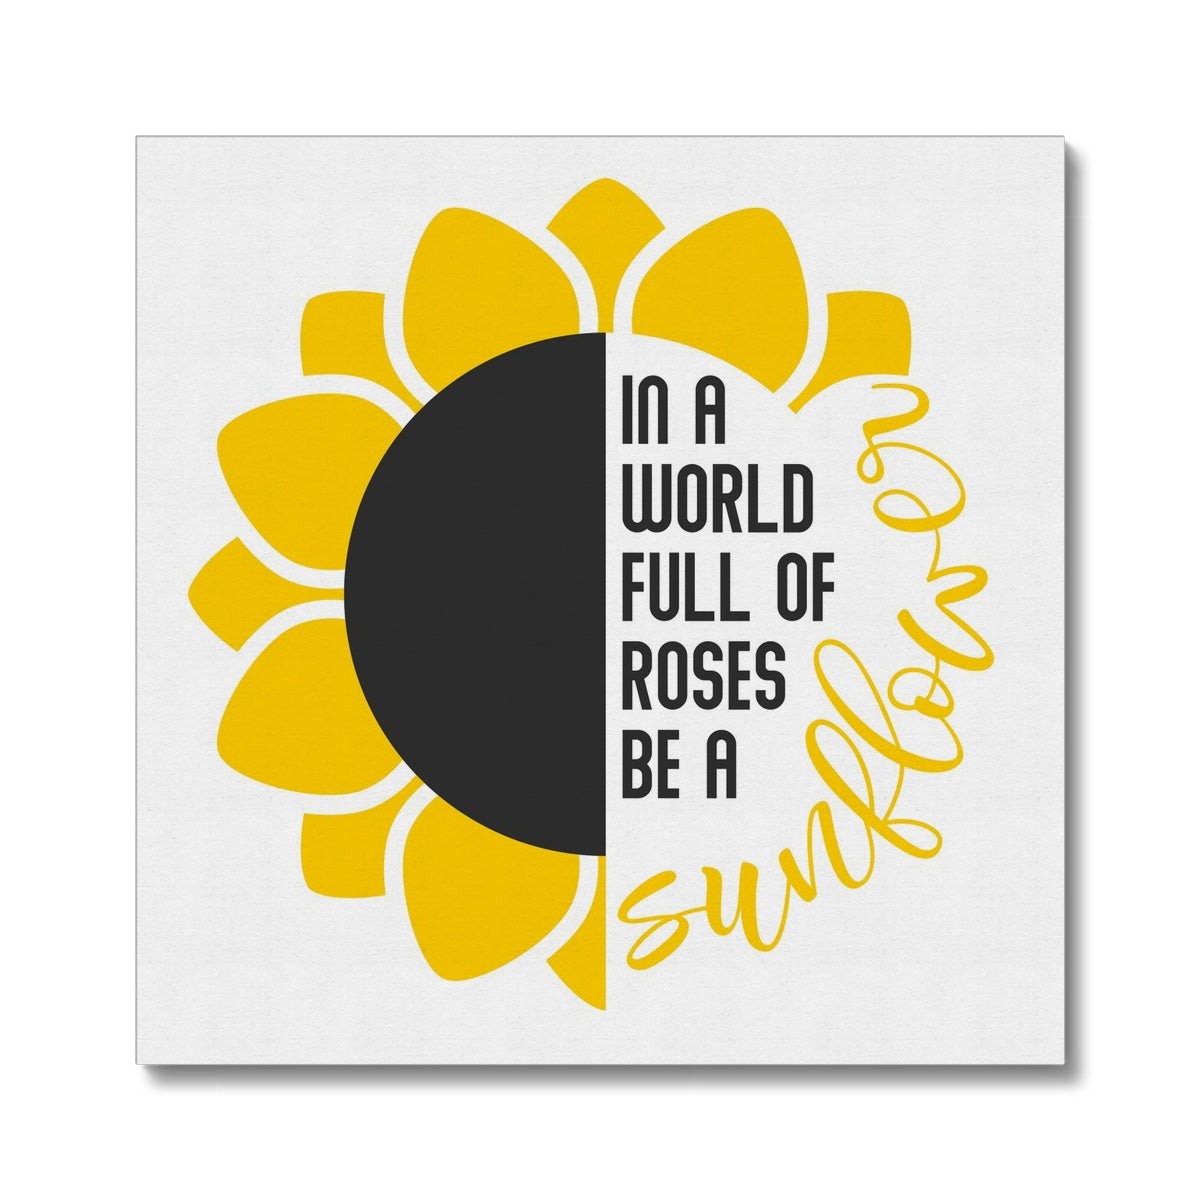 "In A World Full Of Roses Be A Sunflower" Wise Animation Canvas